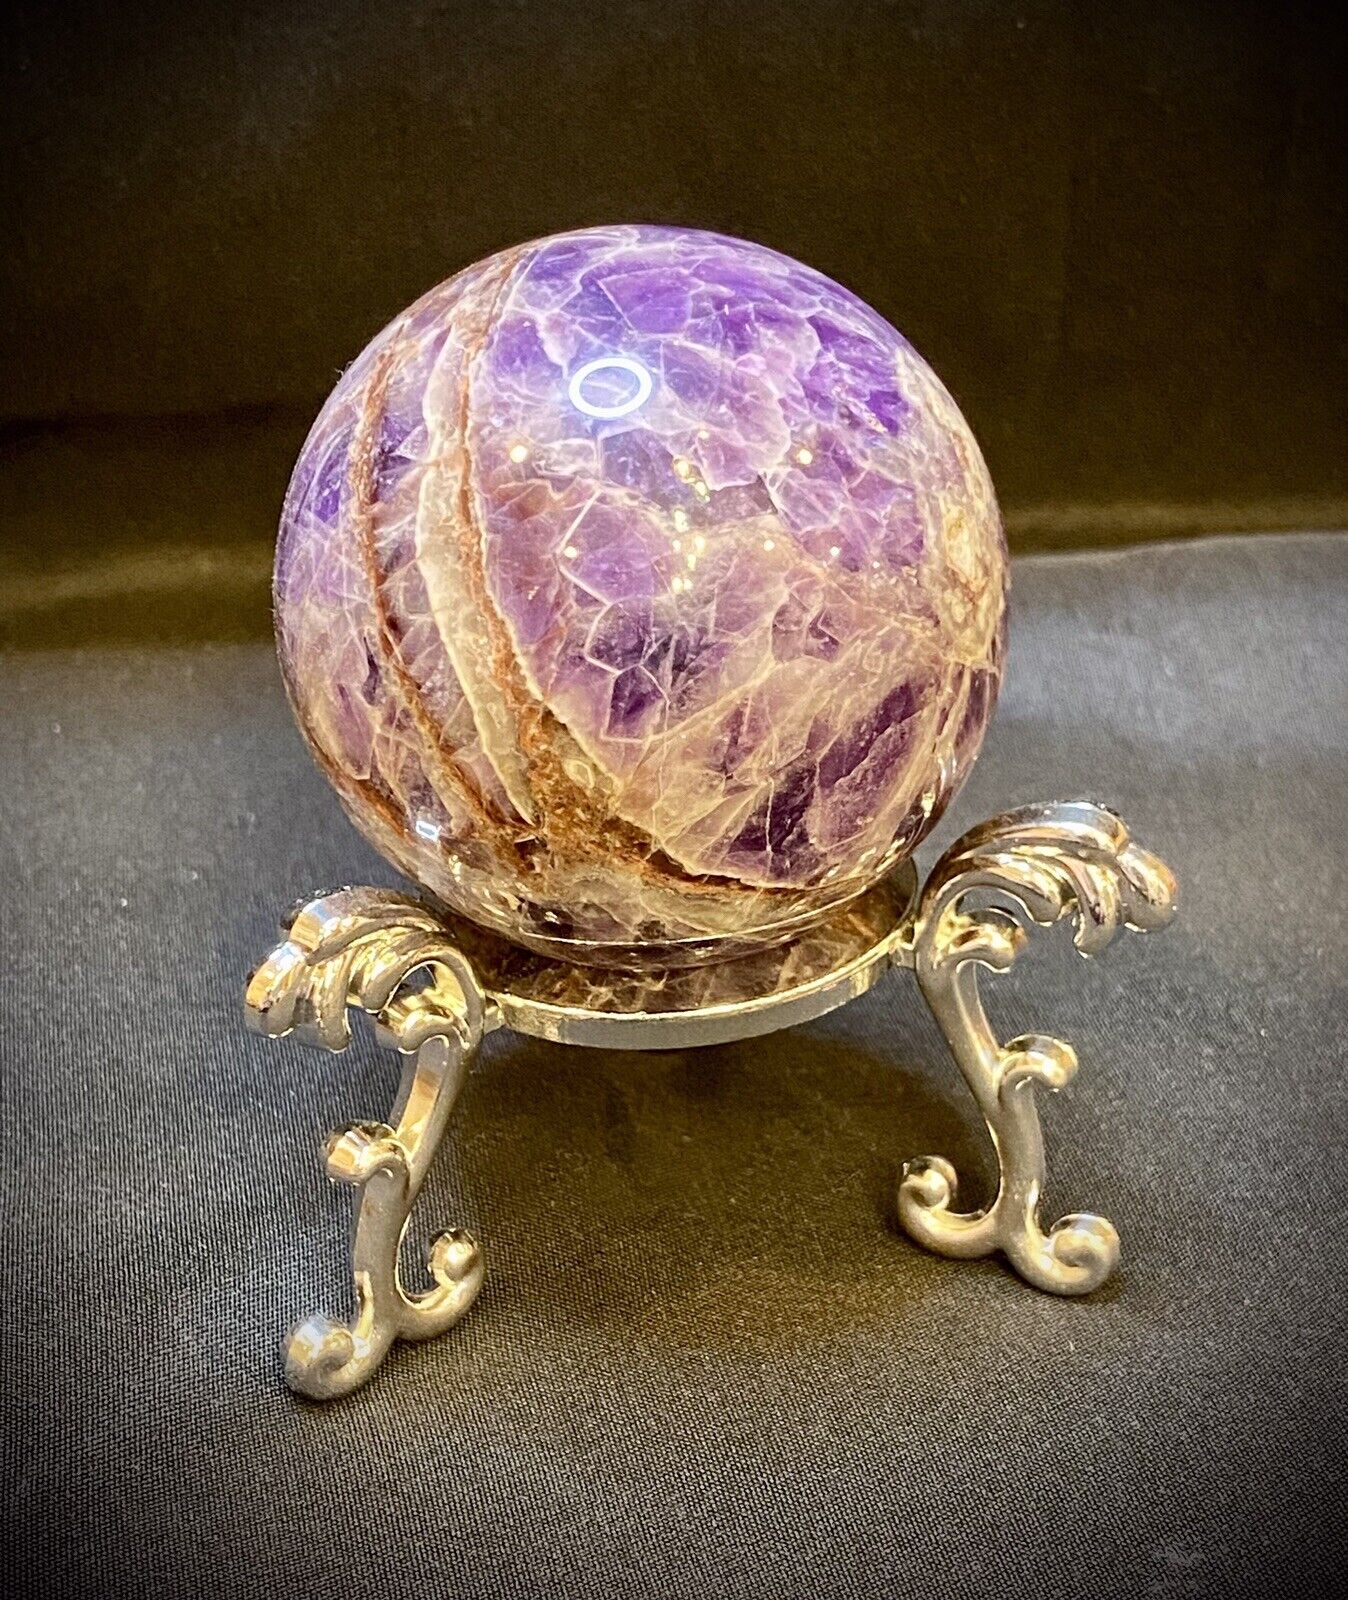 Chevron Amethyst Sphere With Stand 2.1 Inch